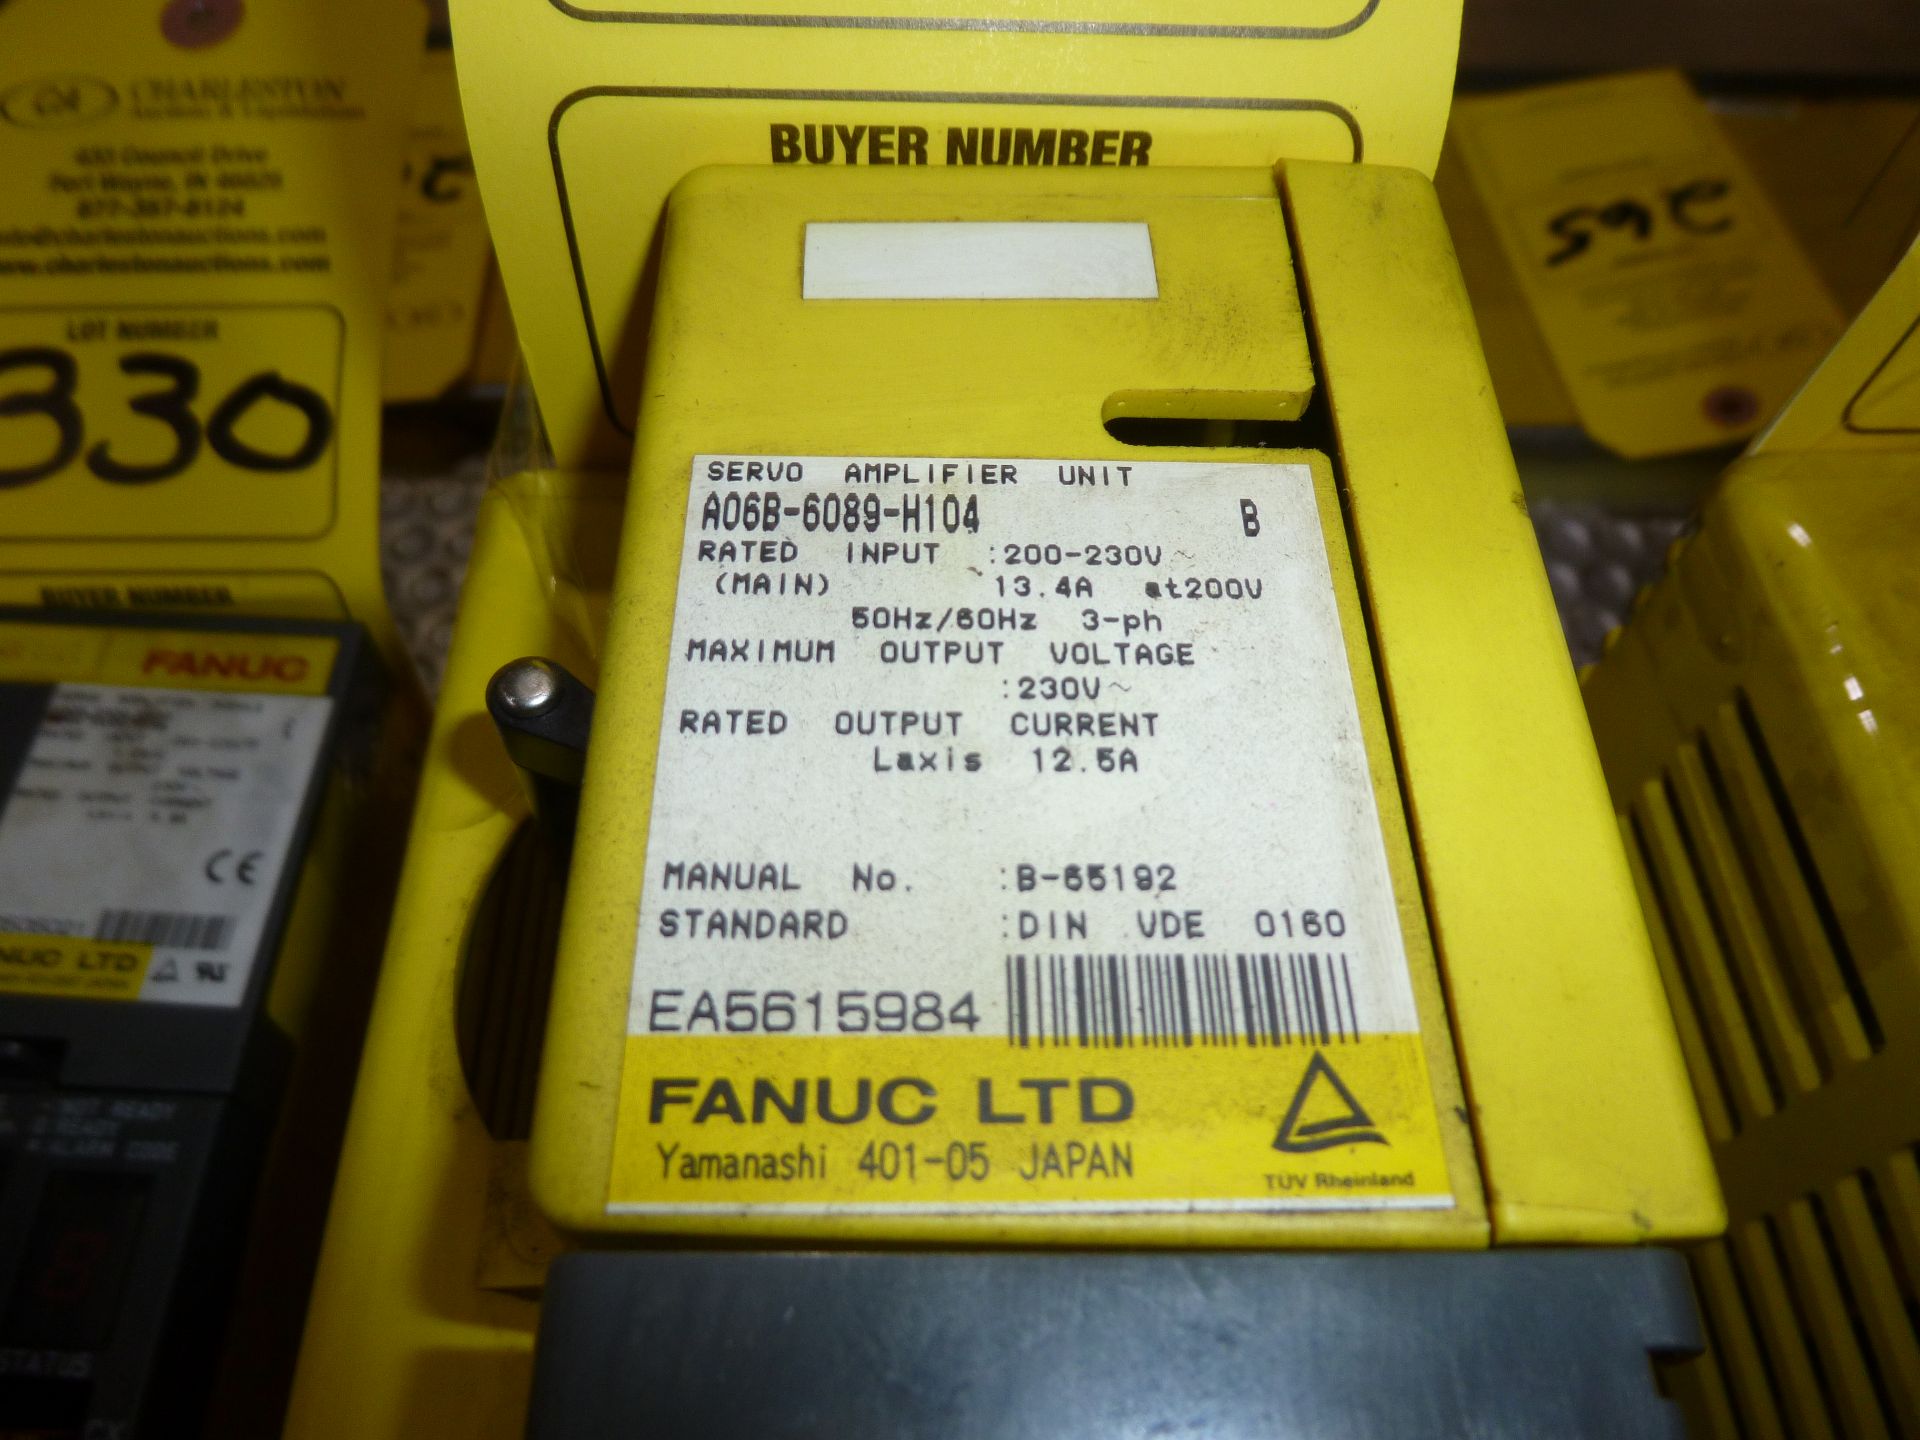 Fanuc servo amplifier unit model A06B-6089-H104, as always with Brolyn LLC auctions, all lots can be - Image 2 of 2